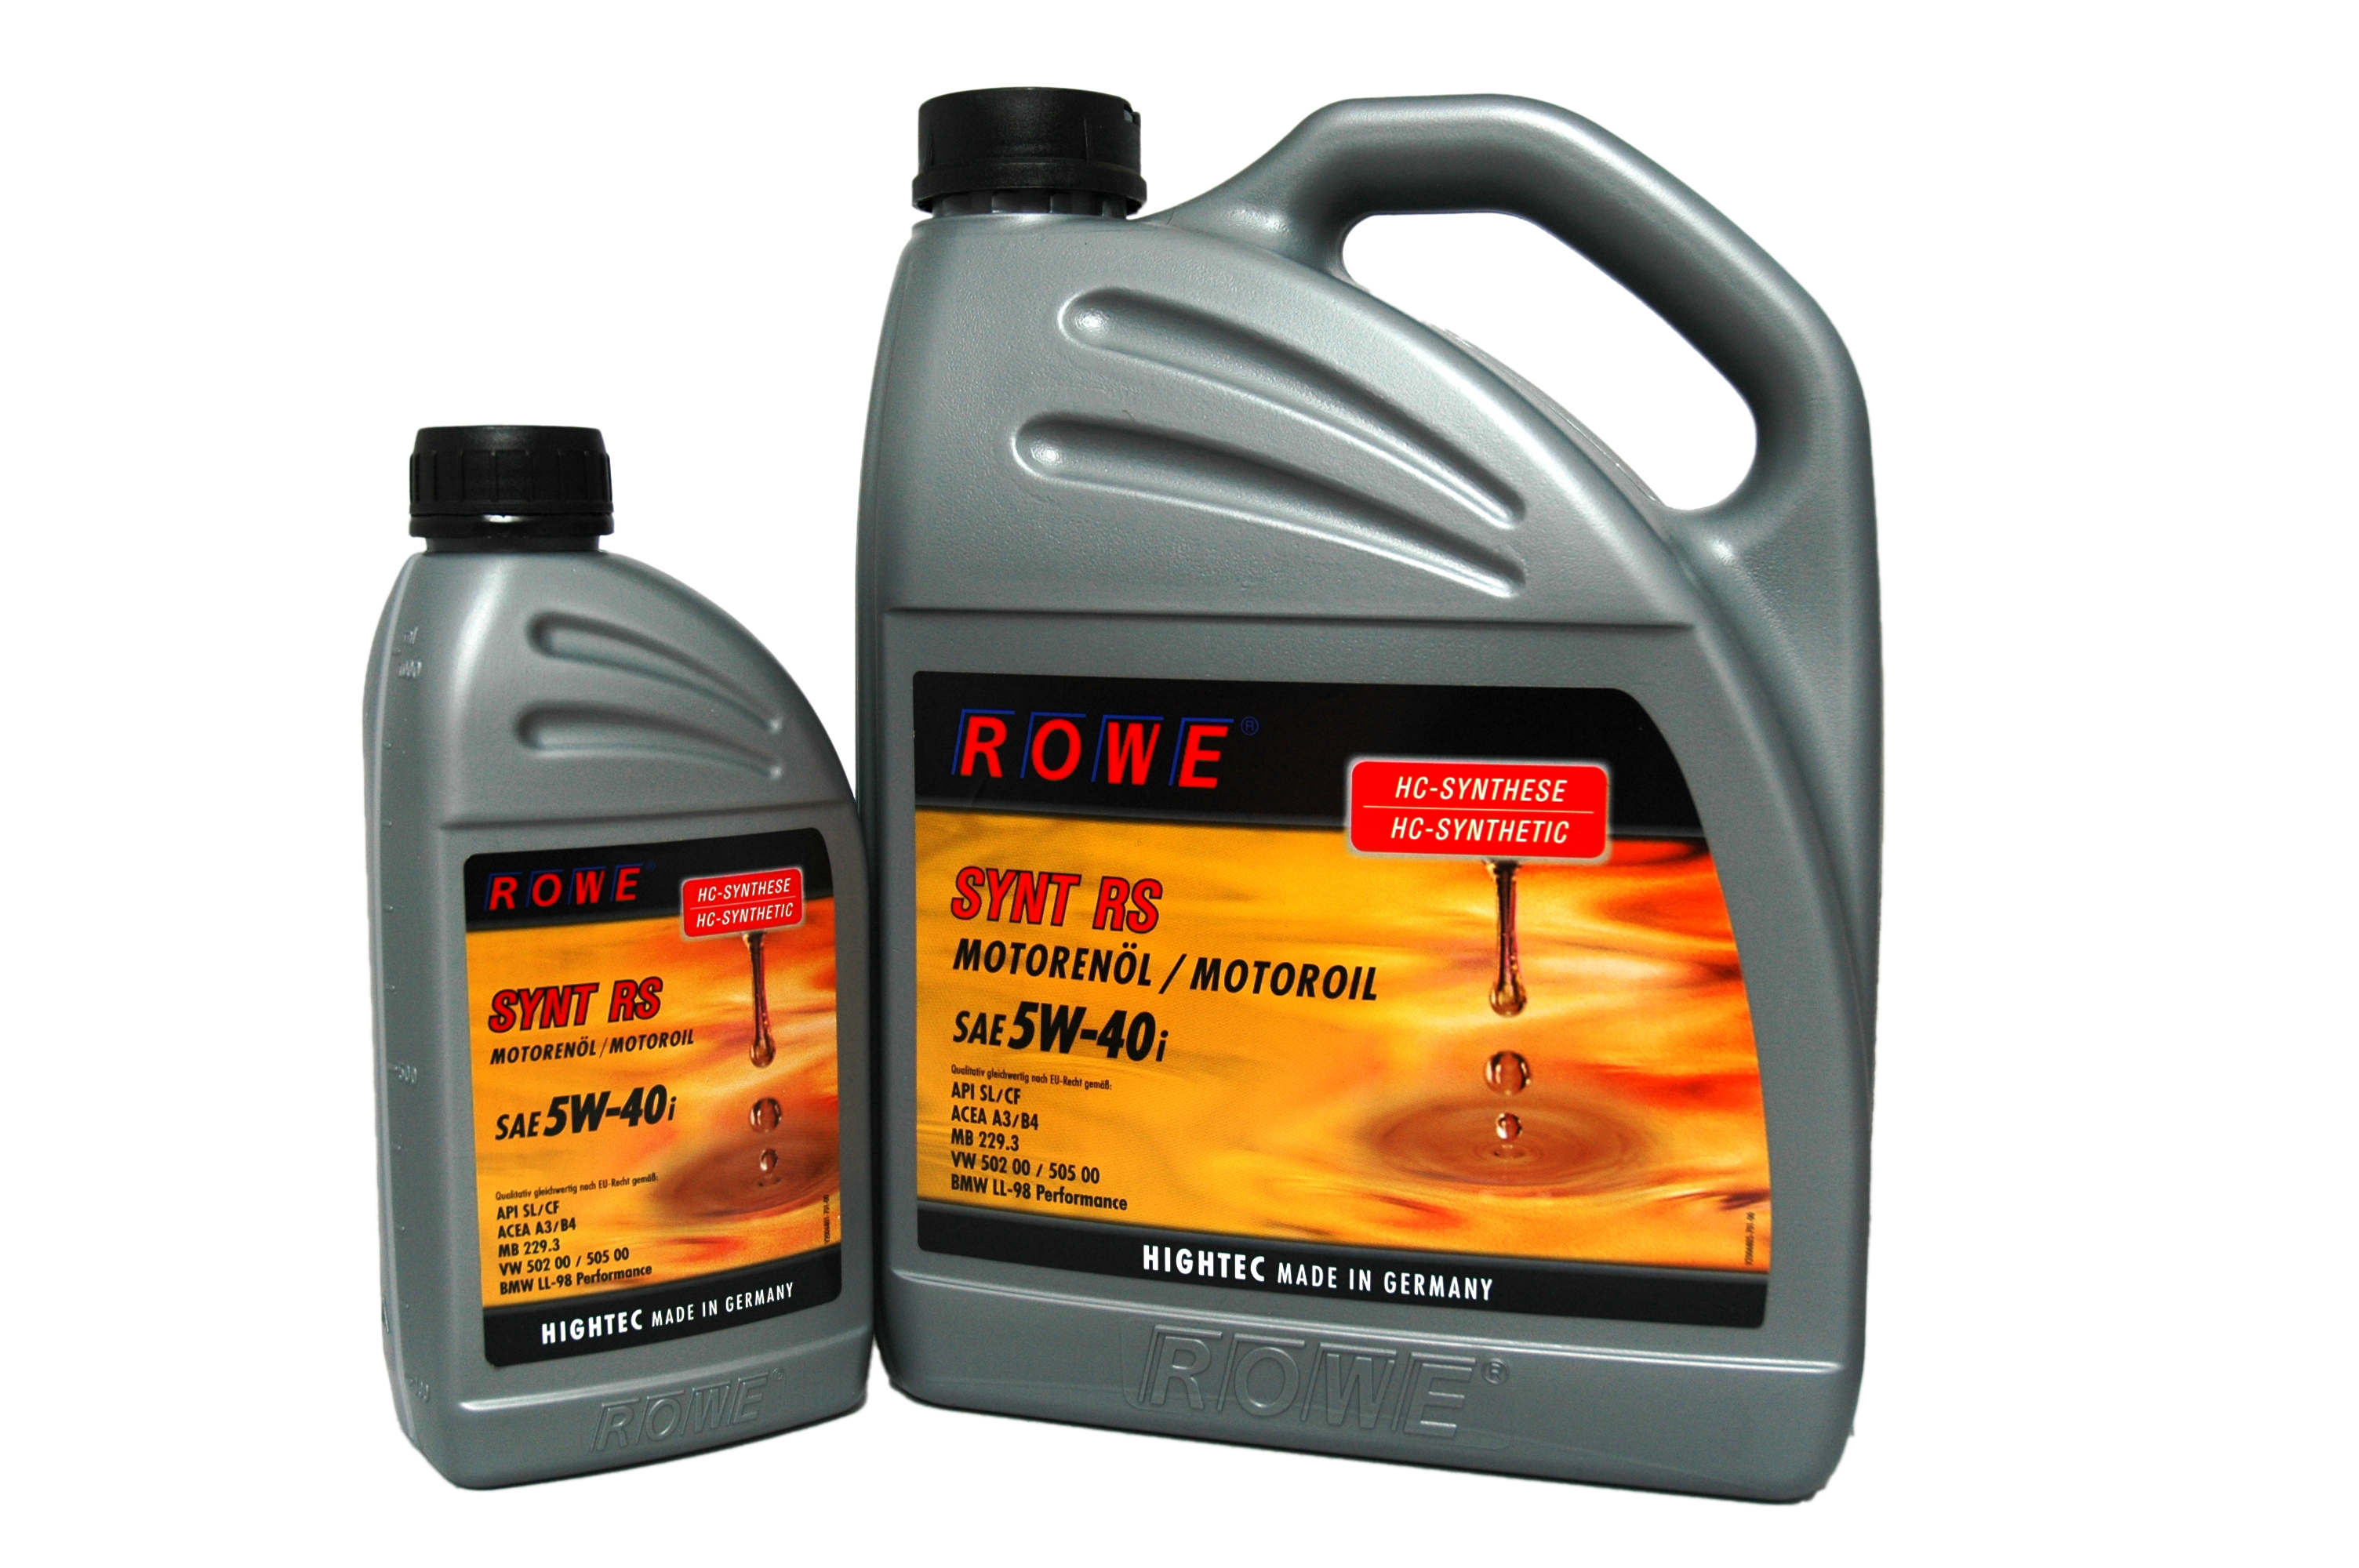 Раво масло. Масло Rowe 5w40 Hightec Synt 5-40. Rowe Hightec 5w-40 Synt Asia 4л. Rowe Synt RS 5w40. Масло Rowe 5w40 Hightec Synt RS.